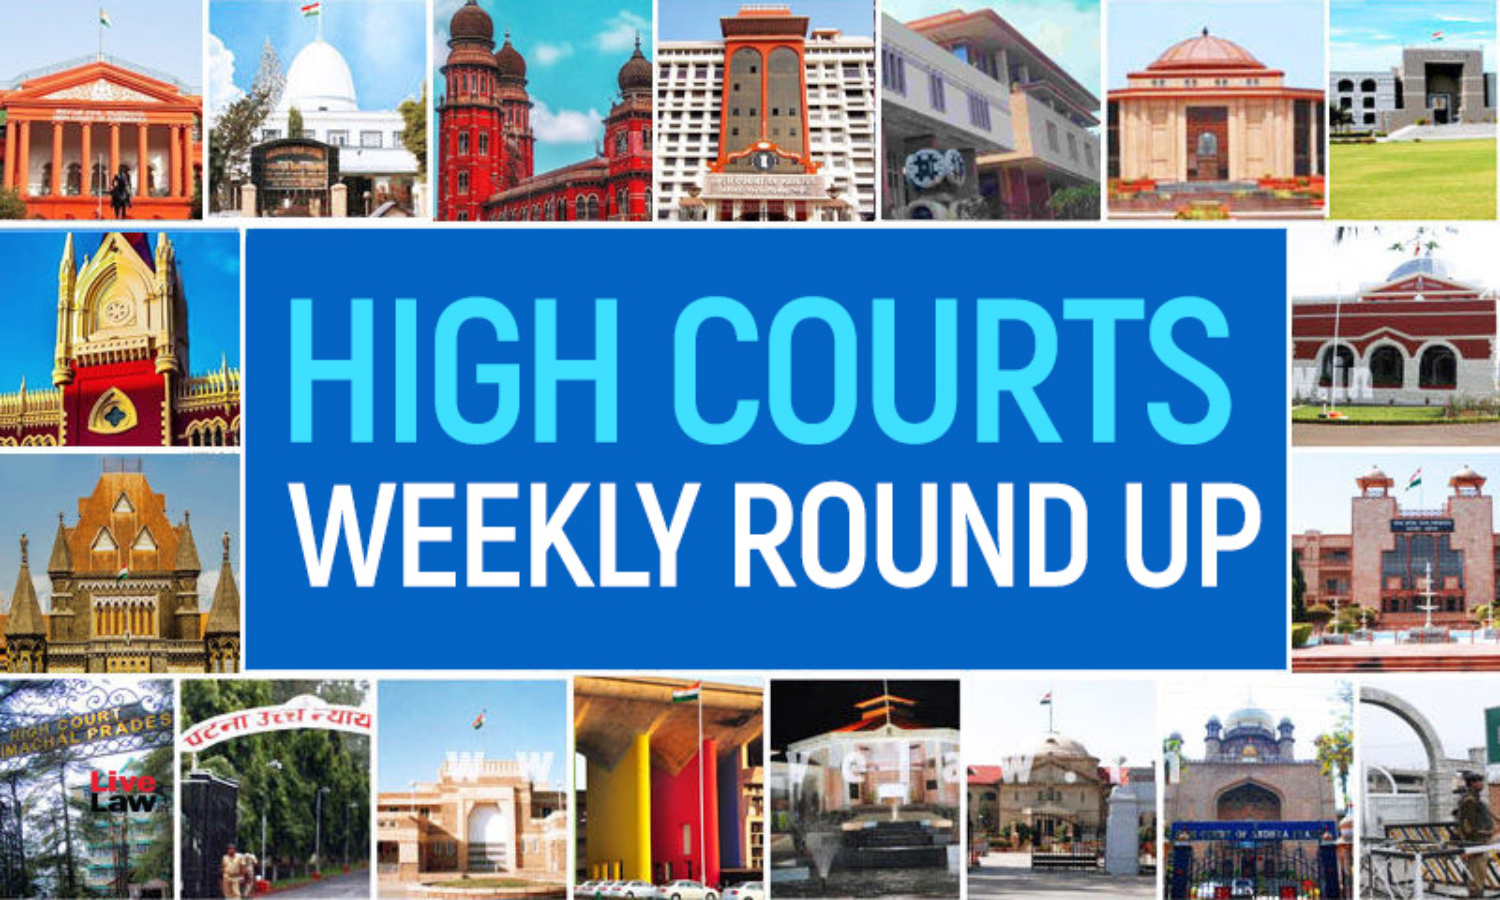 Www Tamil Acctress Lakshmi Menon Xnxx Com - All High Courts Weekly Round Up [18 July 2022 - 24 July 2022]